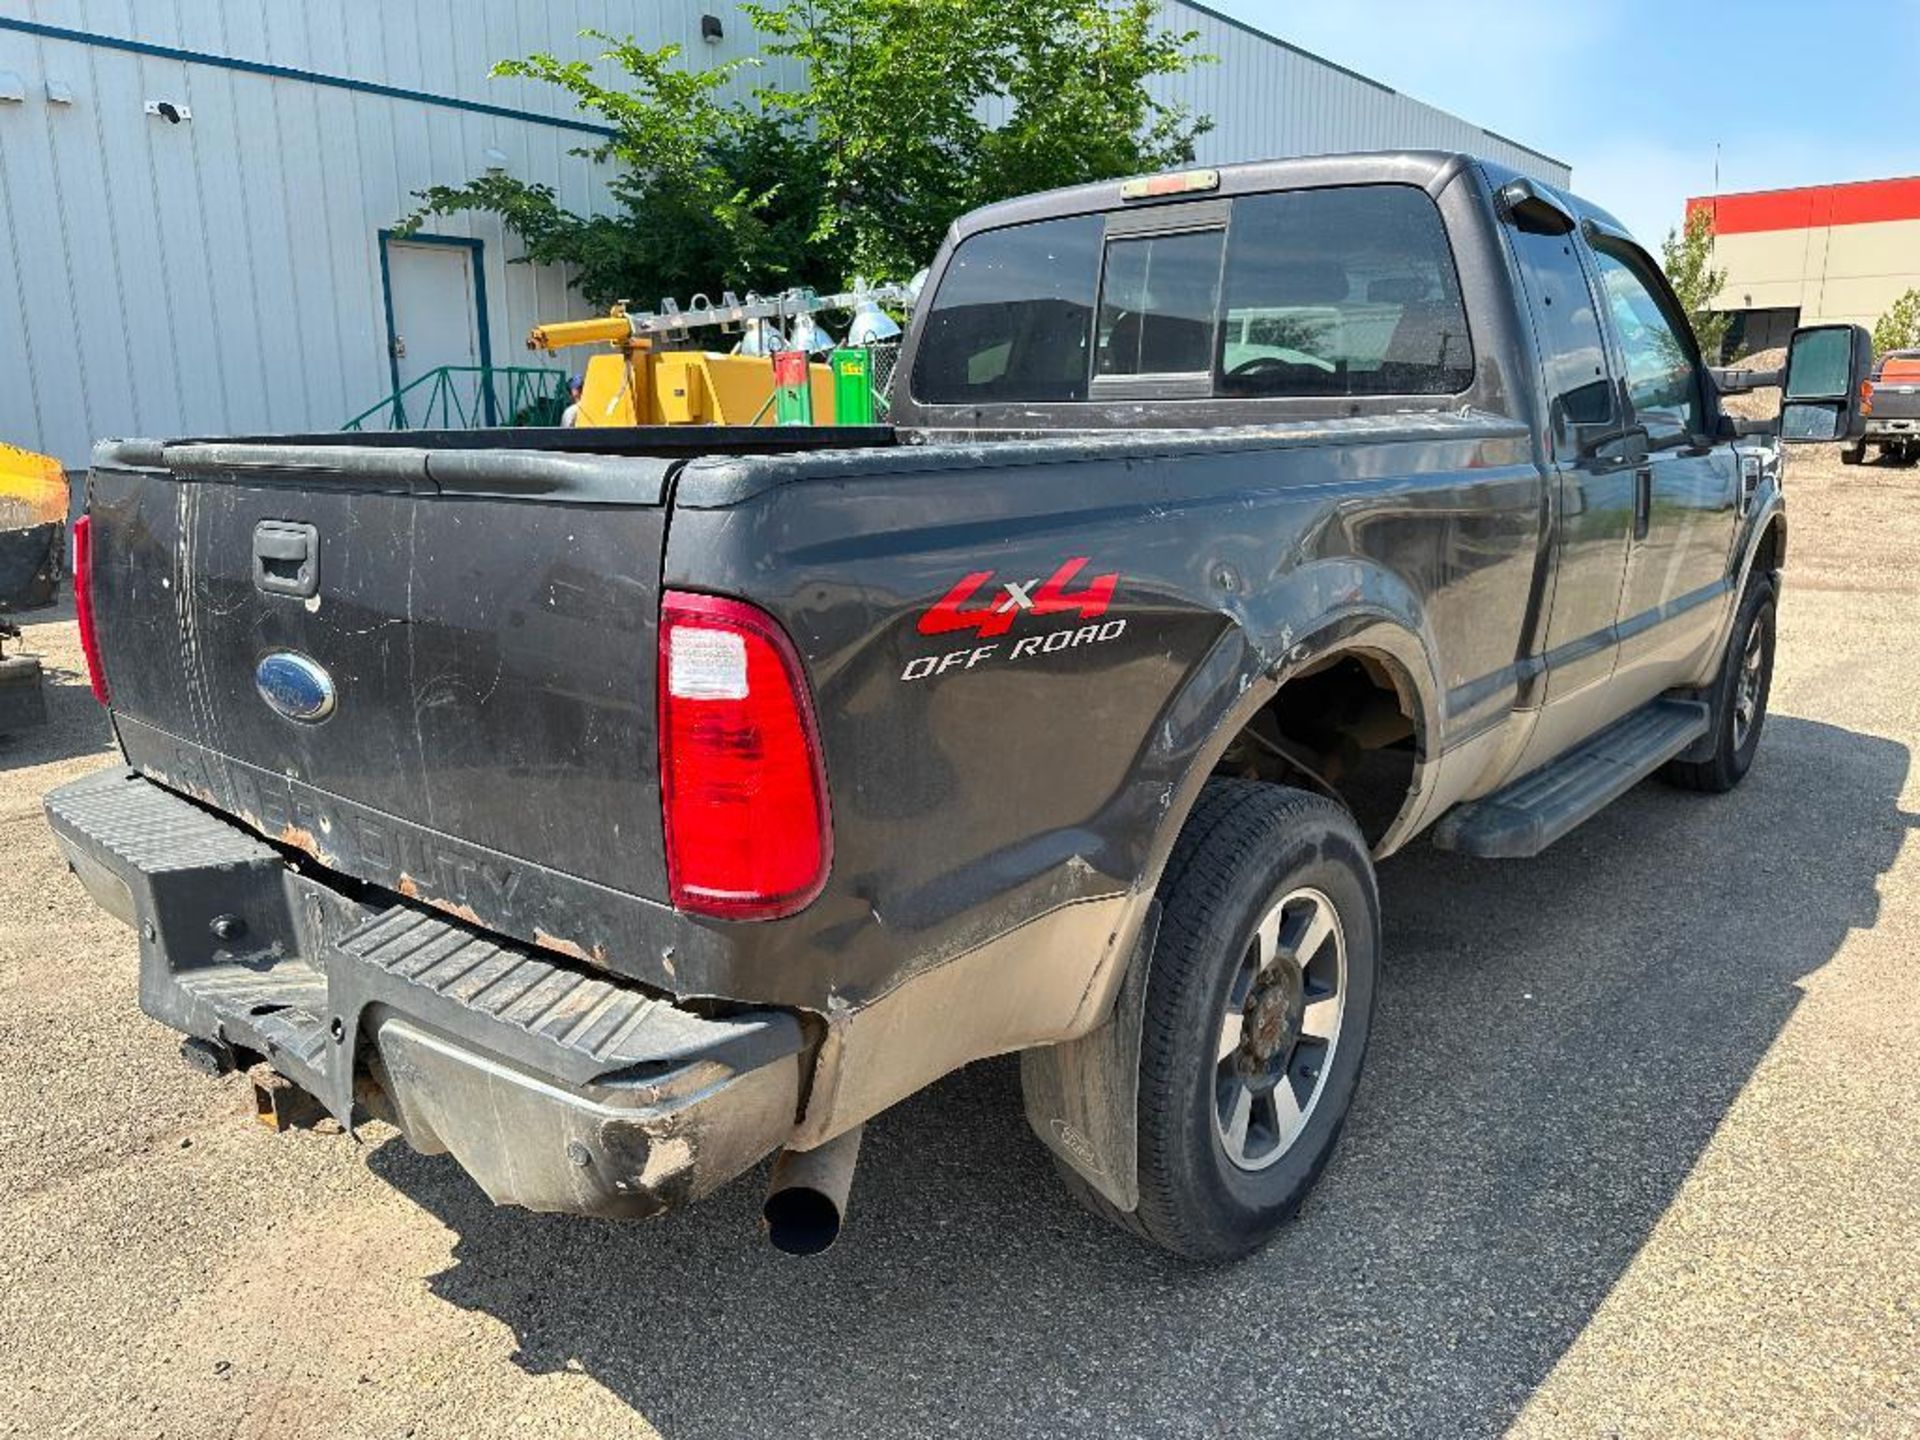 2008 Ford F-350 Lariat, Ext. Cab, Diesel, 337,108 kms, VIN: 1FTWX31R18EA14248 - Image 3 of 13